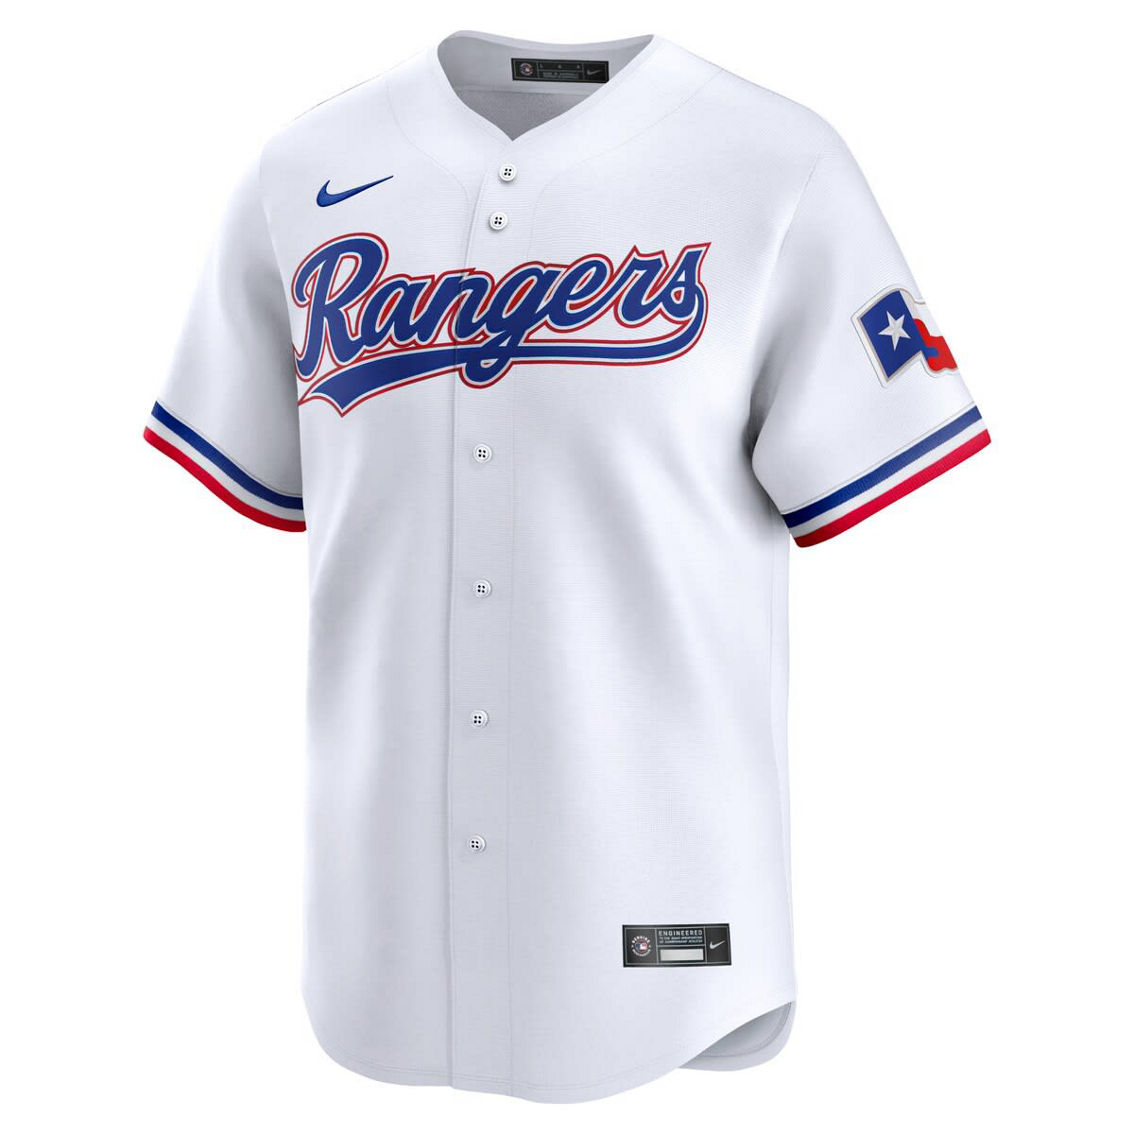 Nike Men's Josh Jung White Texas Rangers Home Limited Player Jersey - Image 3 of 4